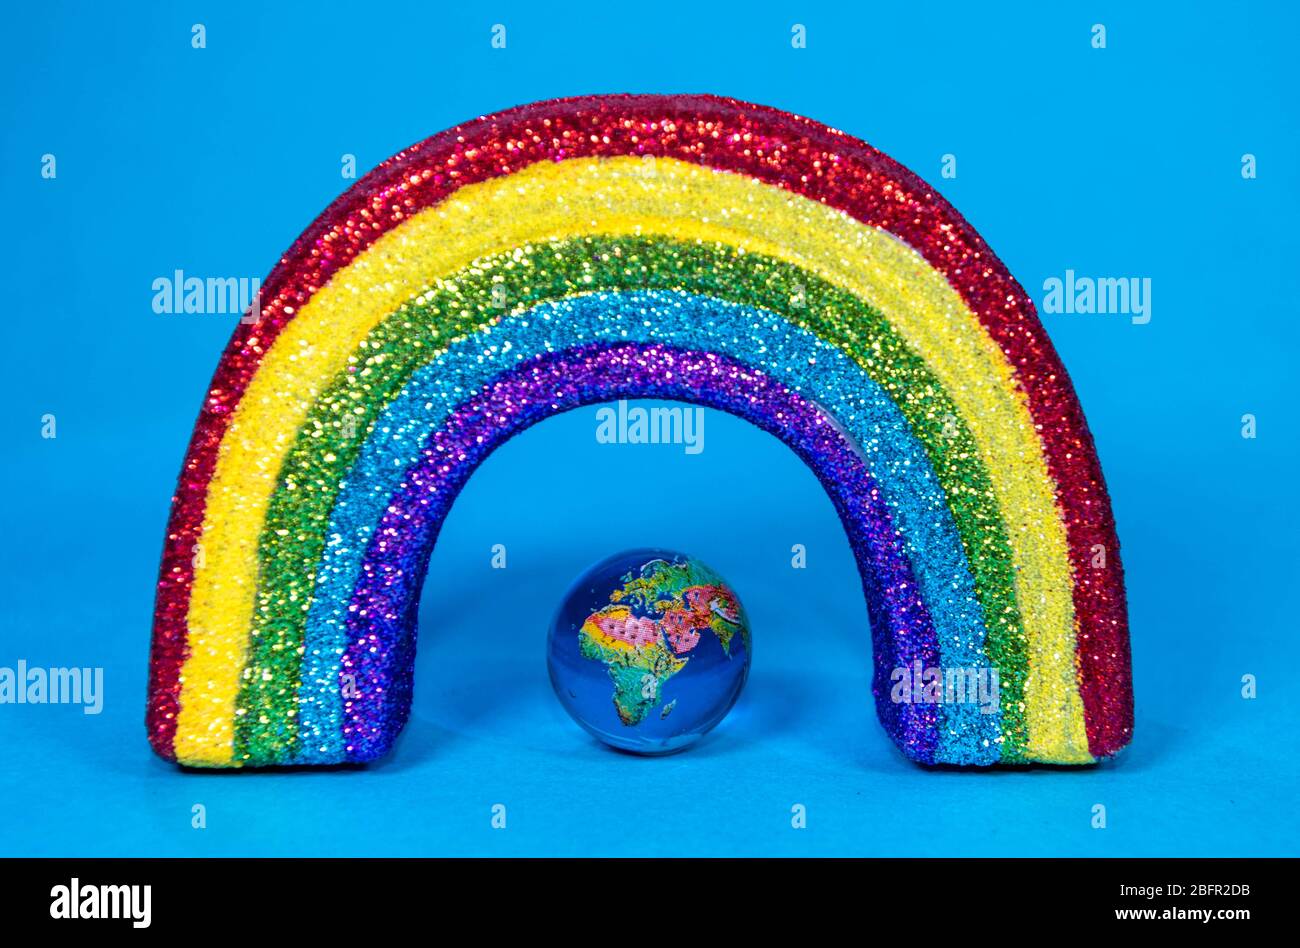 The planet Earth along with a colorful rainbow colored ribbon which signifies many things, such as the Coronavirus pandemic. Stock Photo